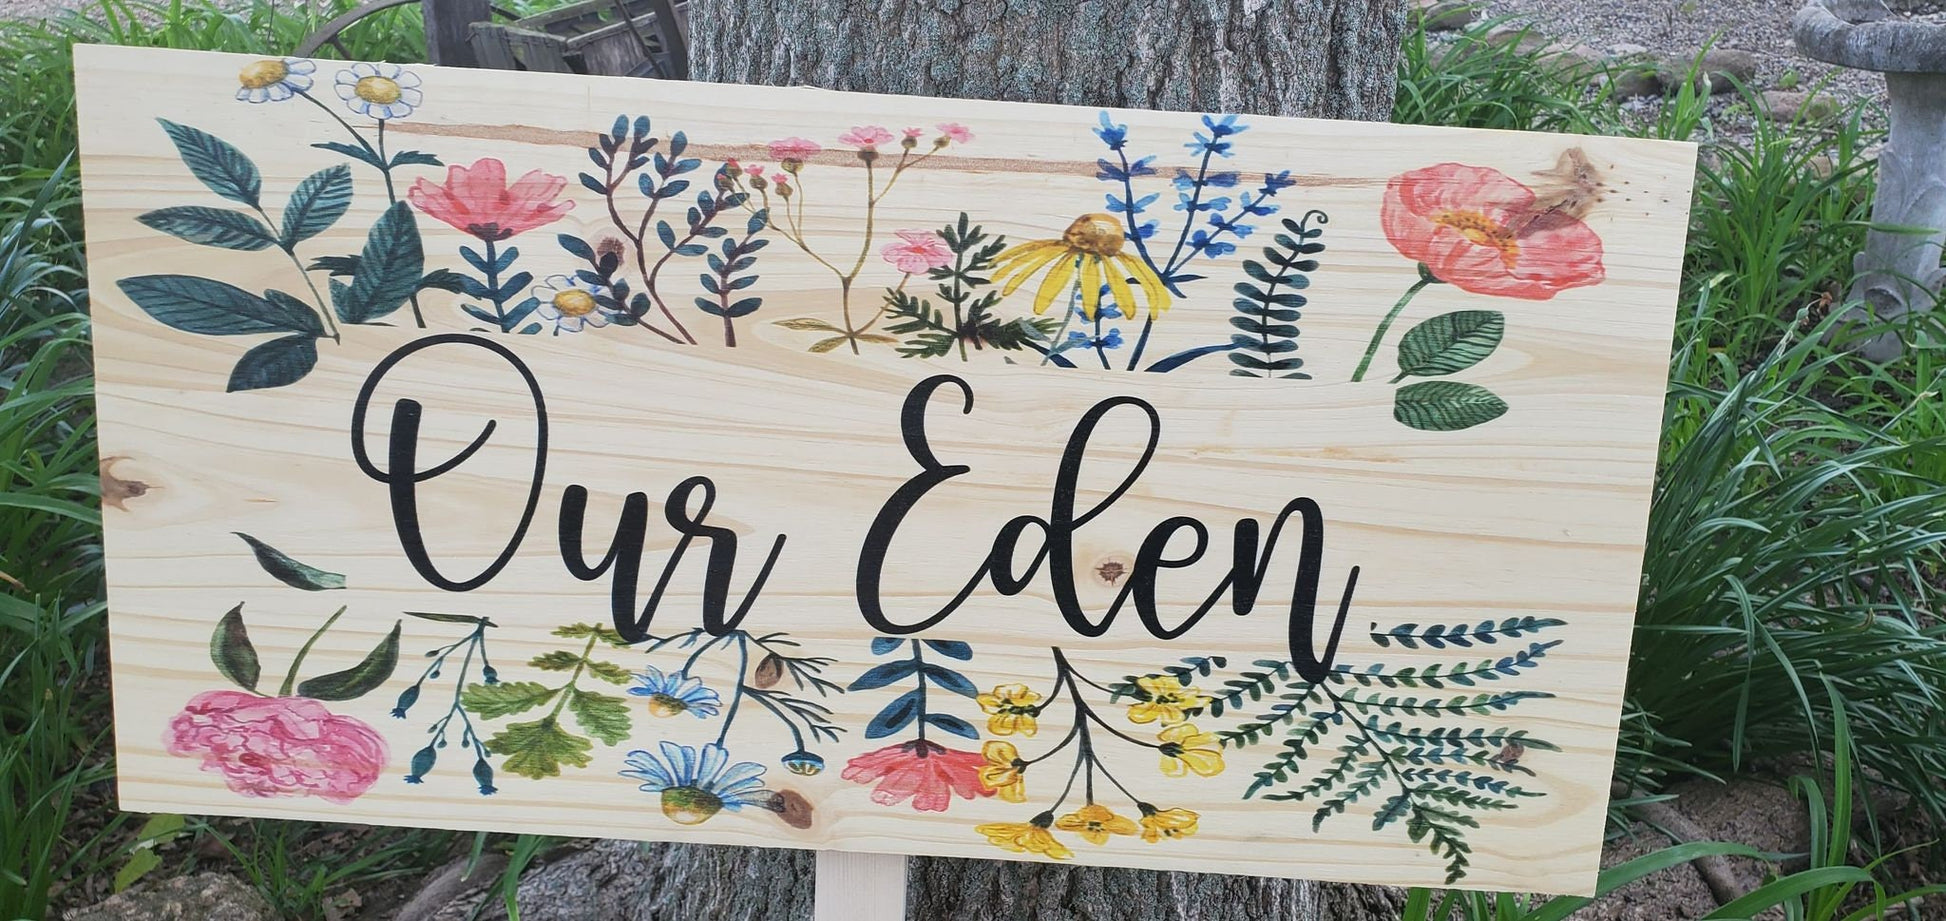 Our Eden Garden Floral Sign Mothers Gift Wife Gift Gardener Flowers Printed On Wood Decoration Poppy Color Bright Spring Summer Wooden Sign